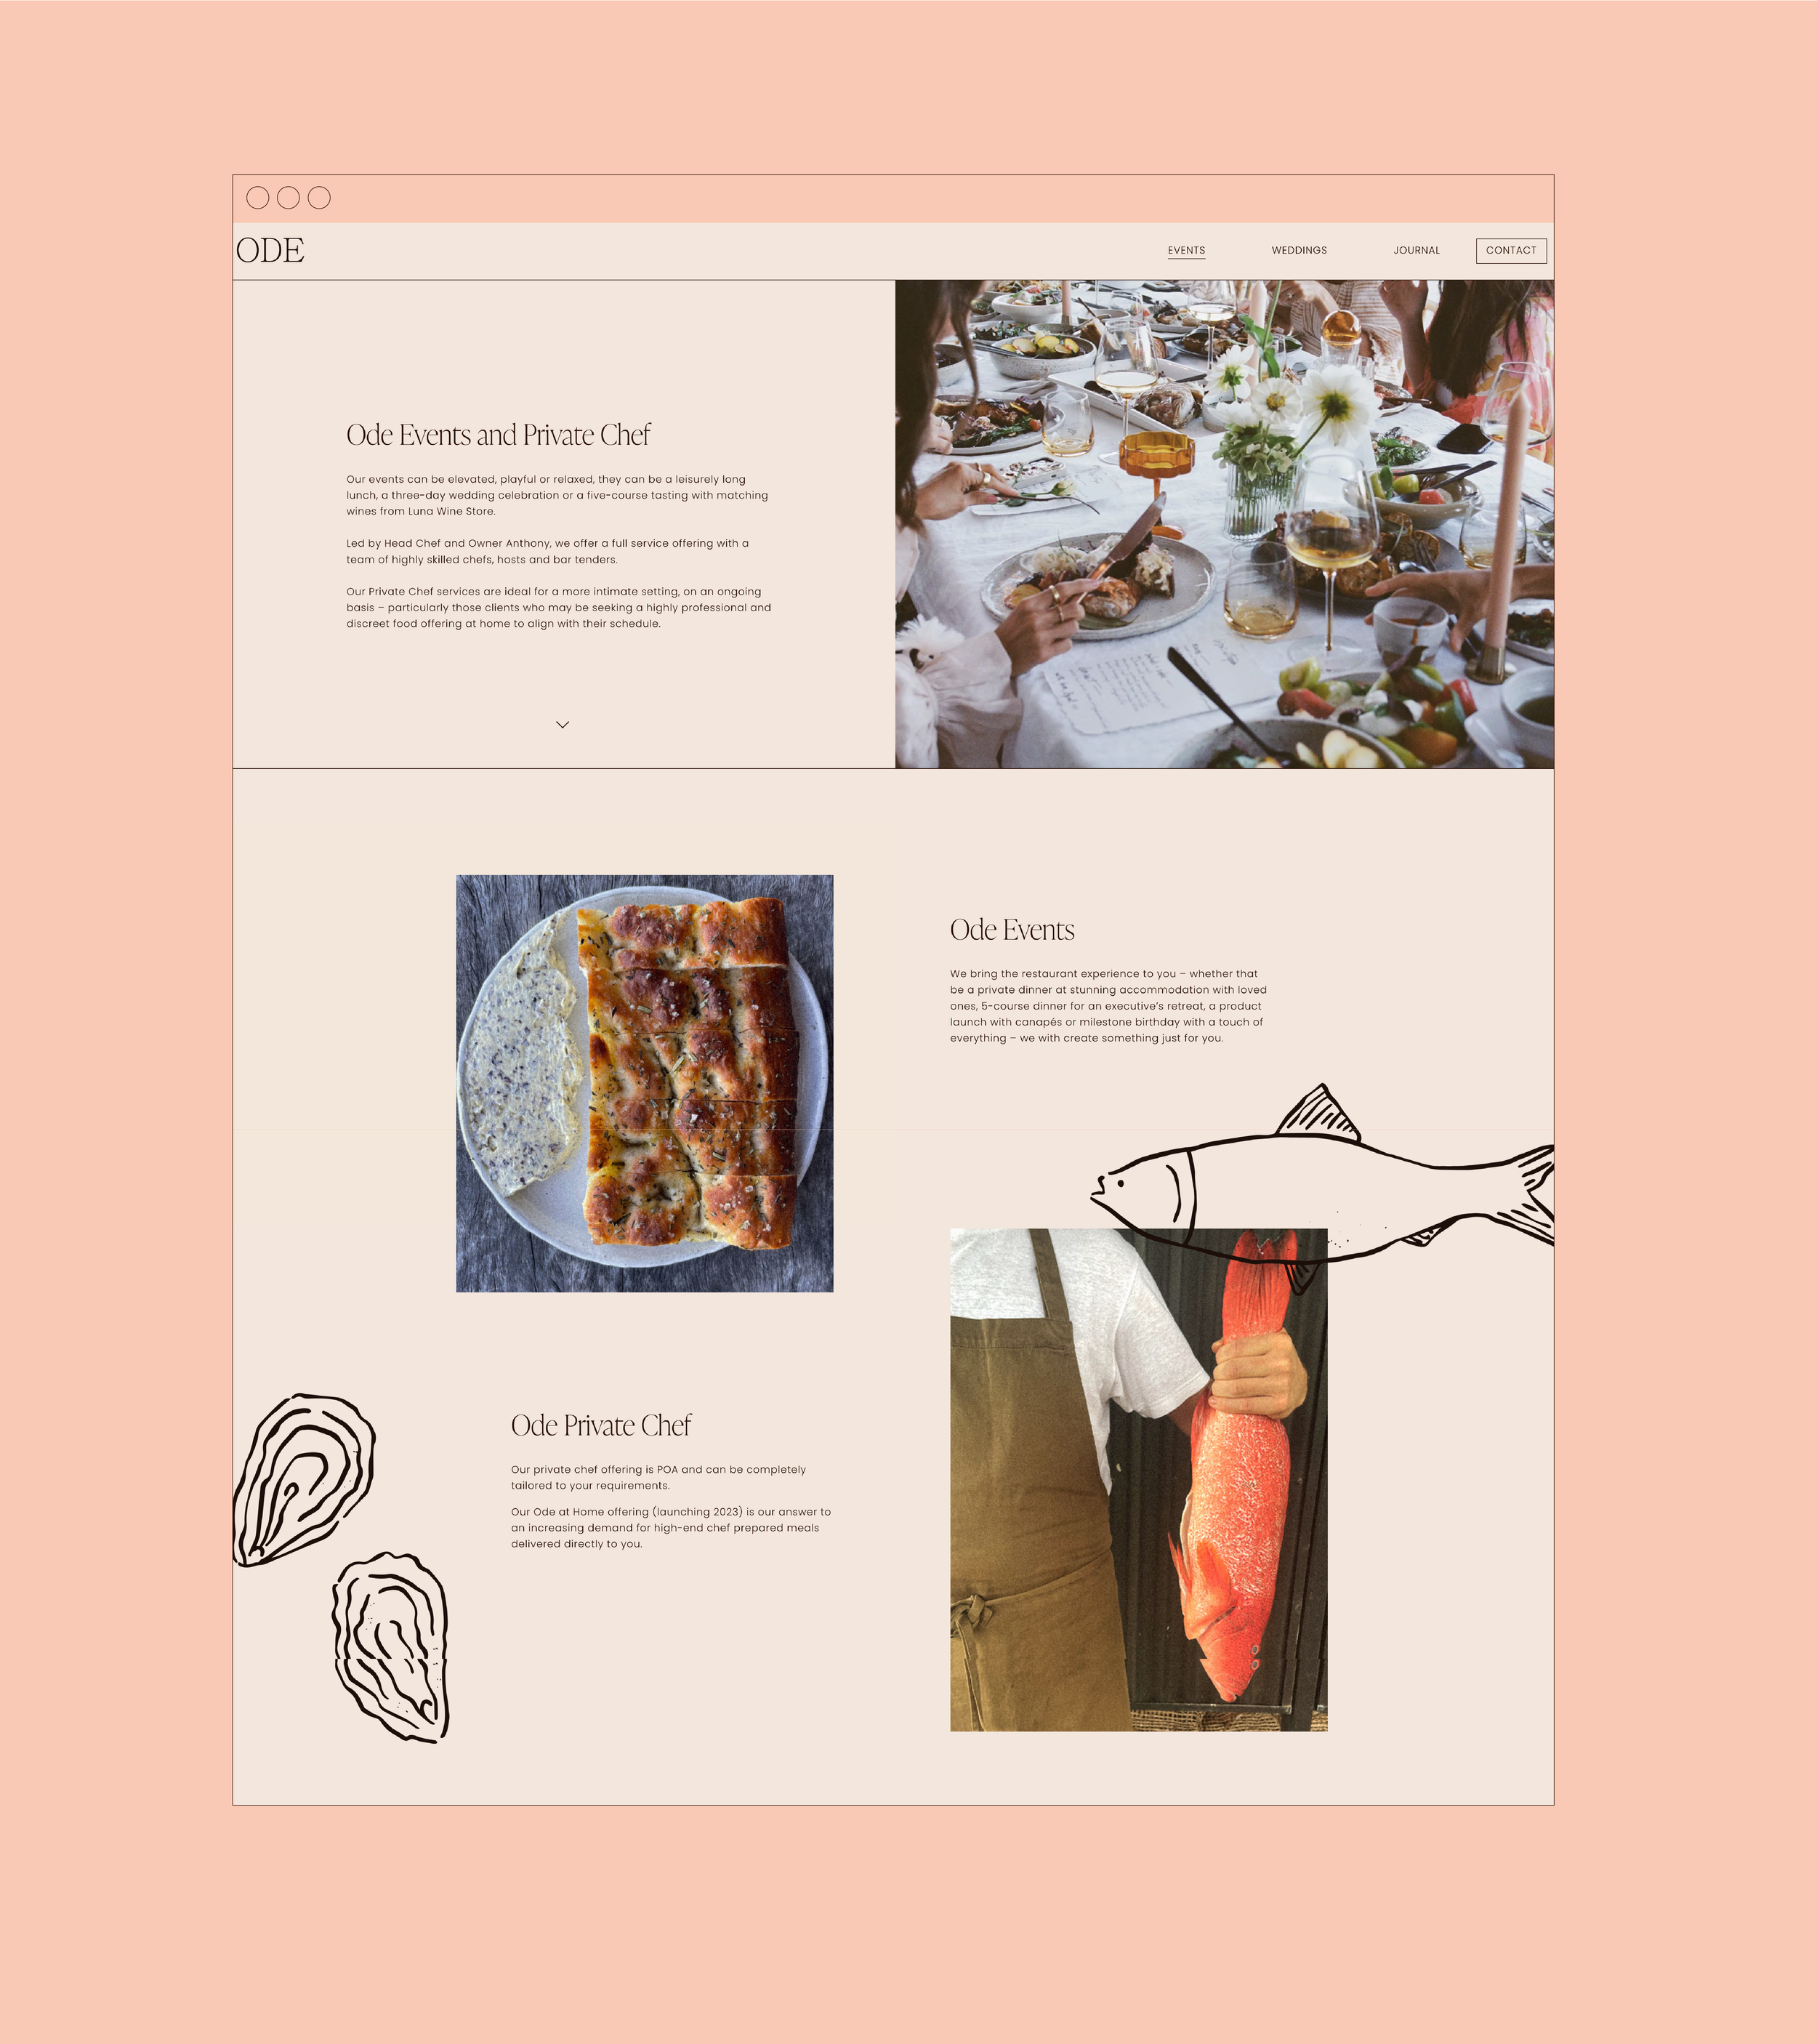 SoftLaunch-Hospitality-Branding-Restaurant - Web - Design - Ode Dining - Catering-08.png